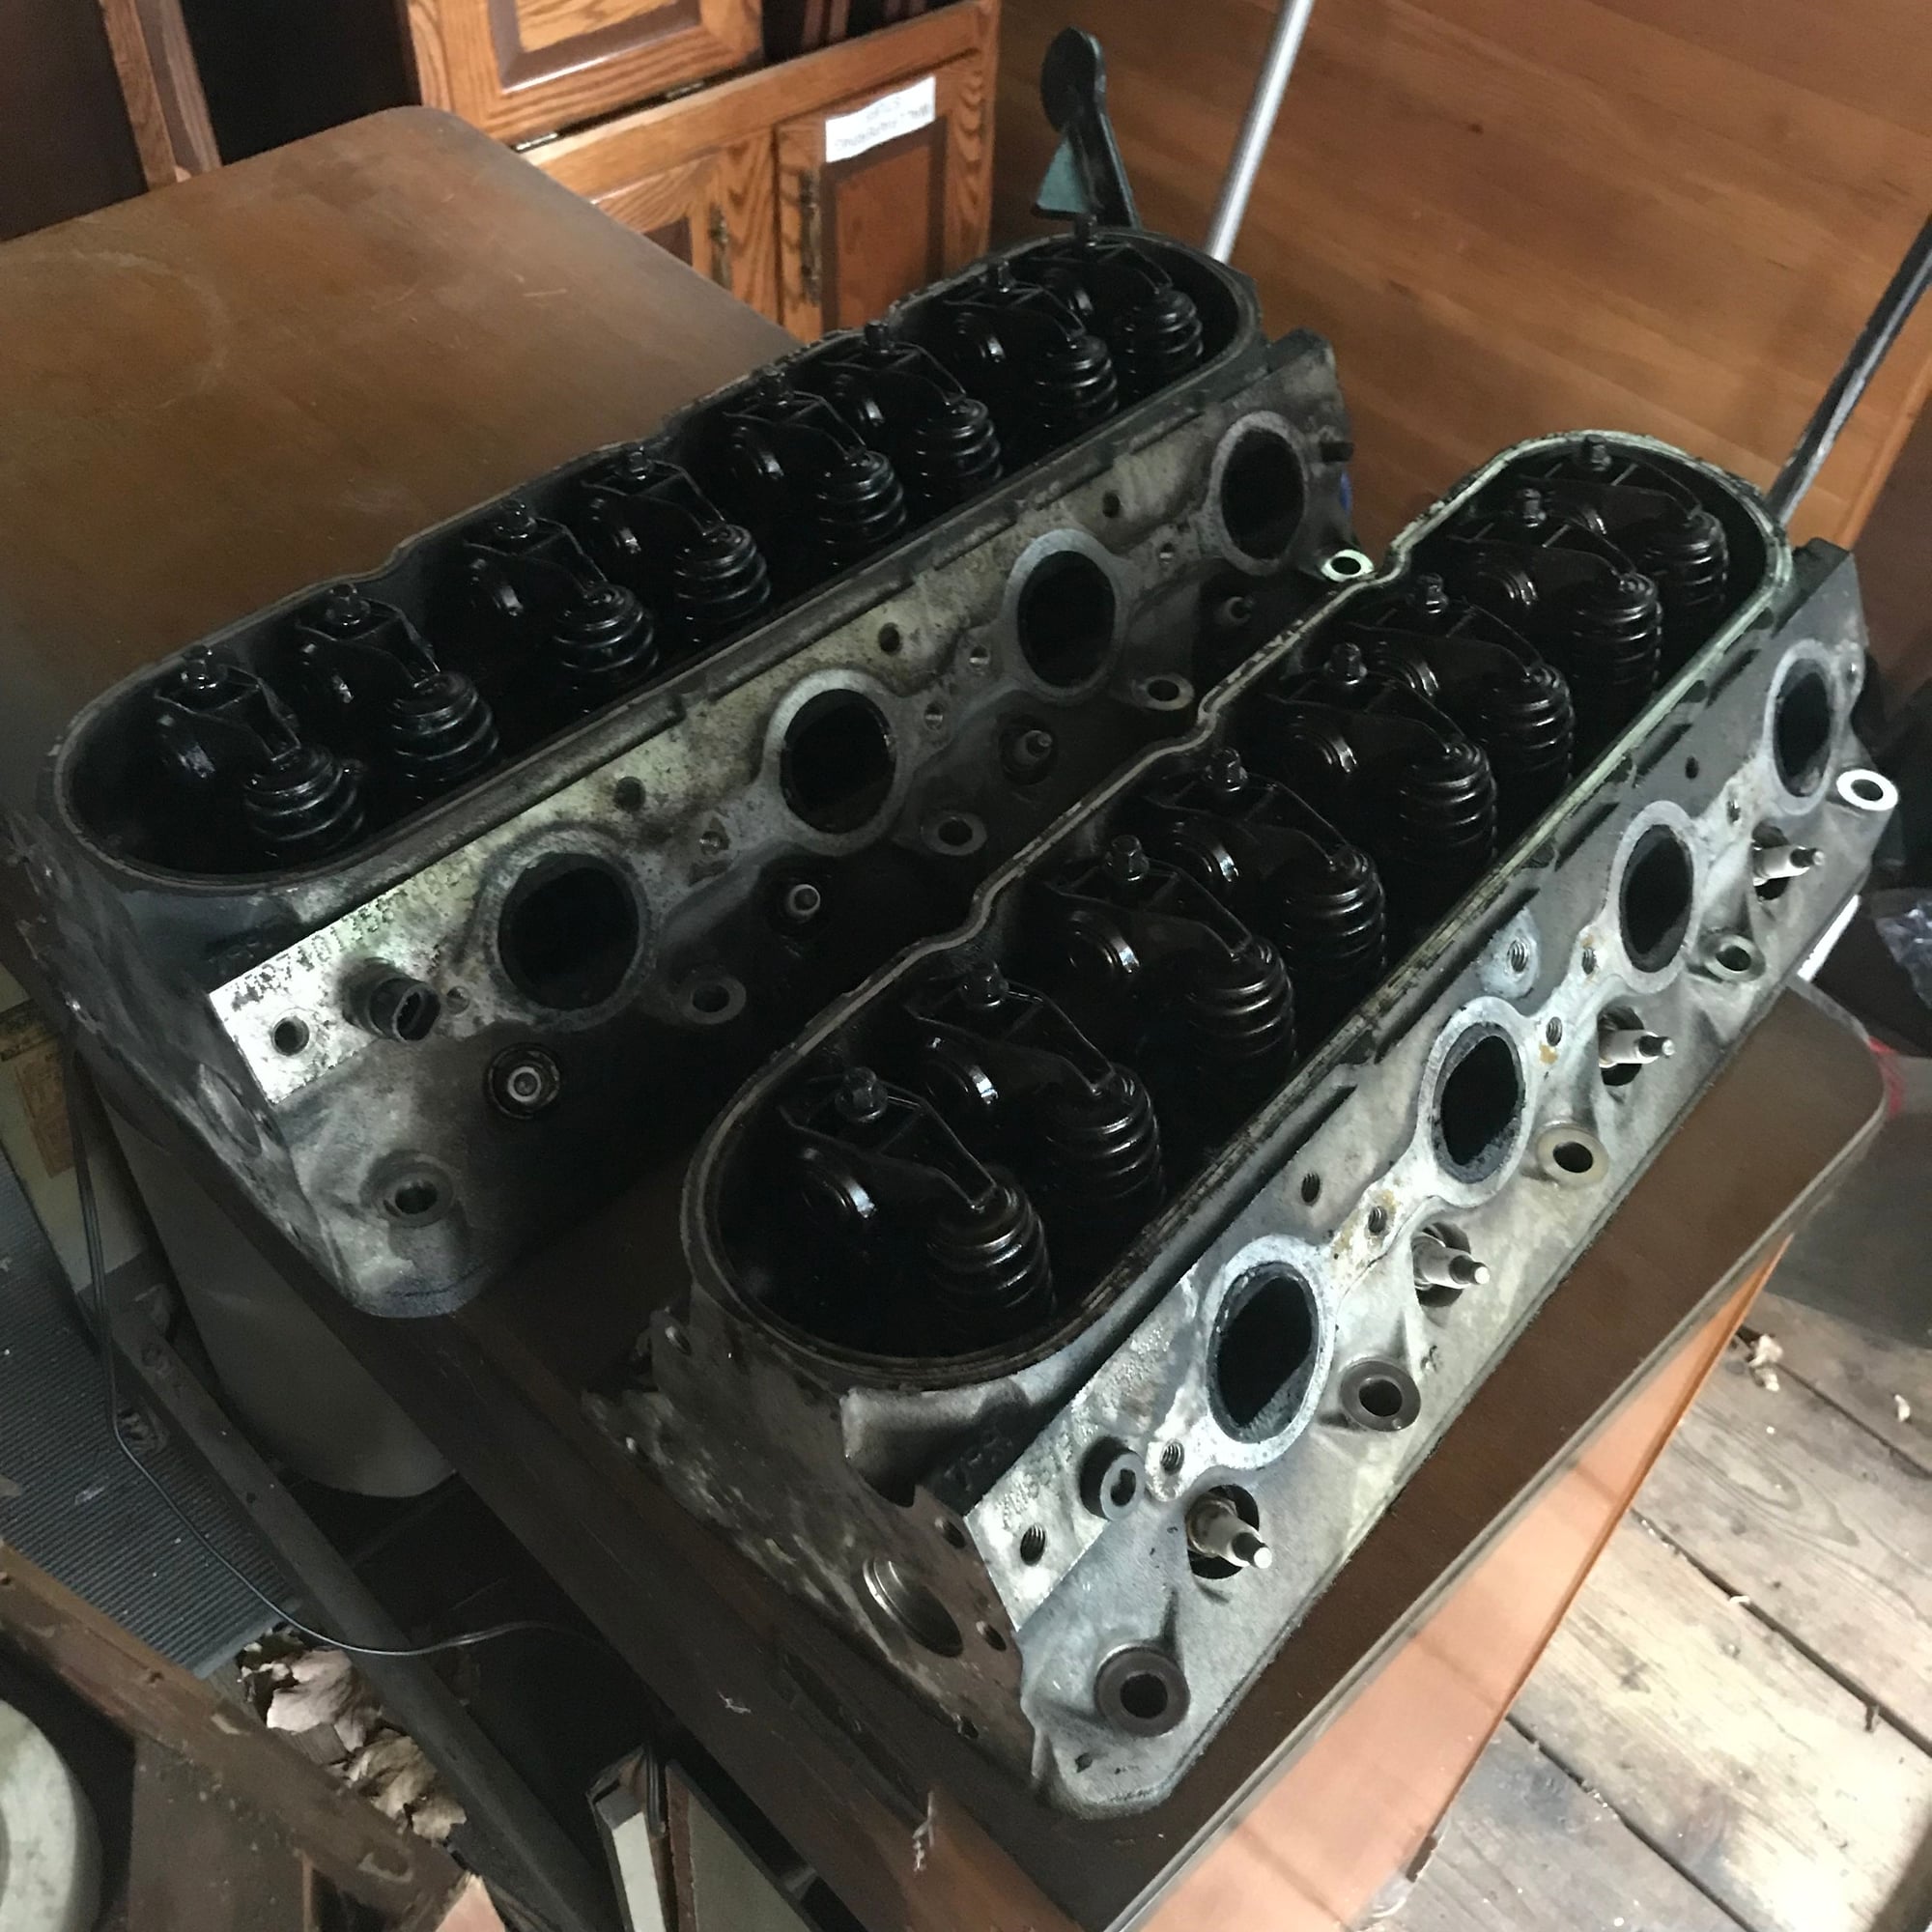  - 799 cylinder heads, complete - Old Town, ME 04468, United States